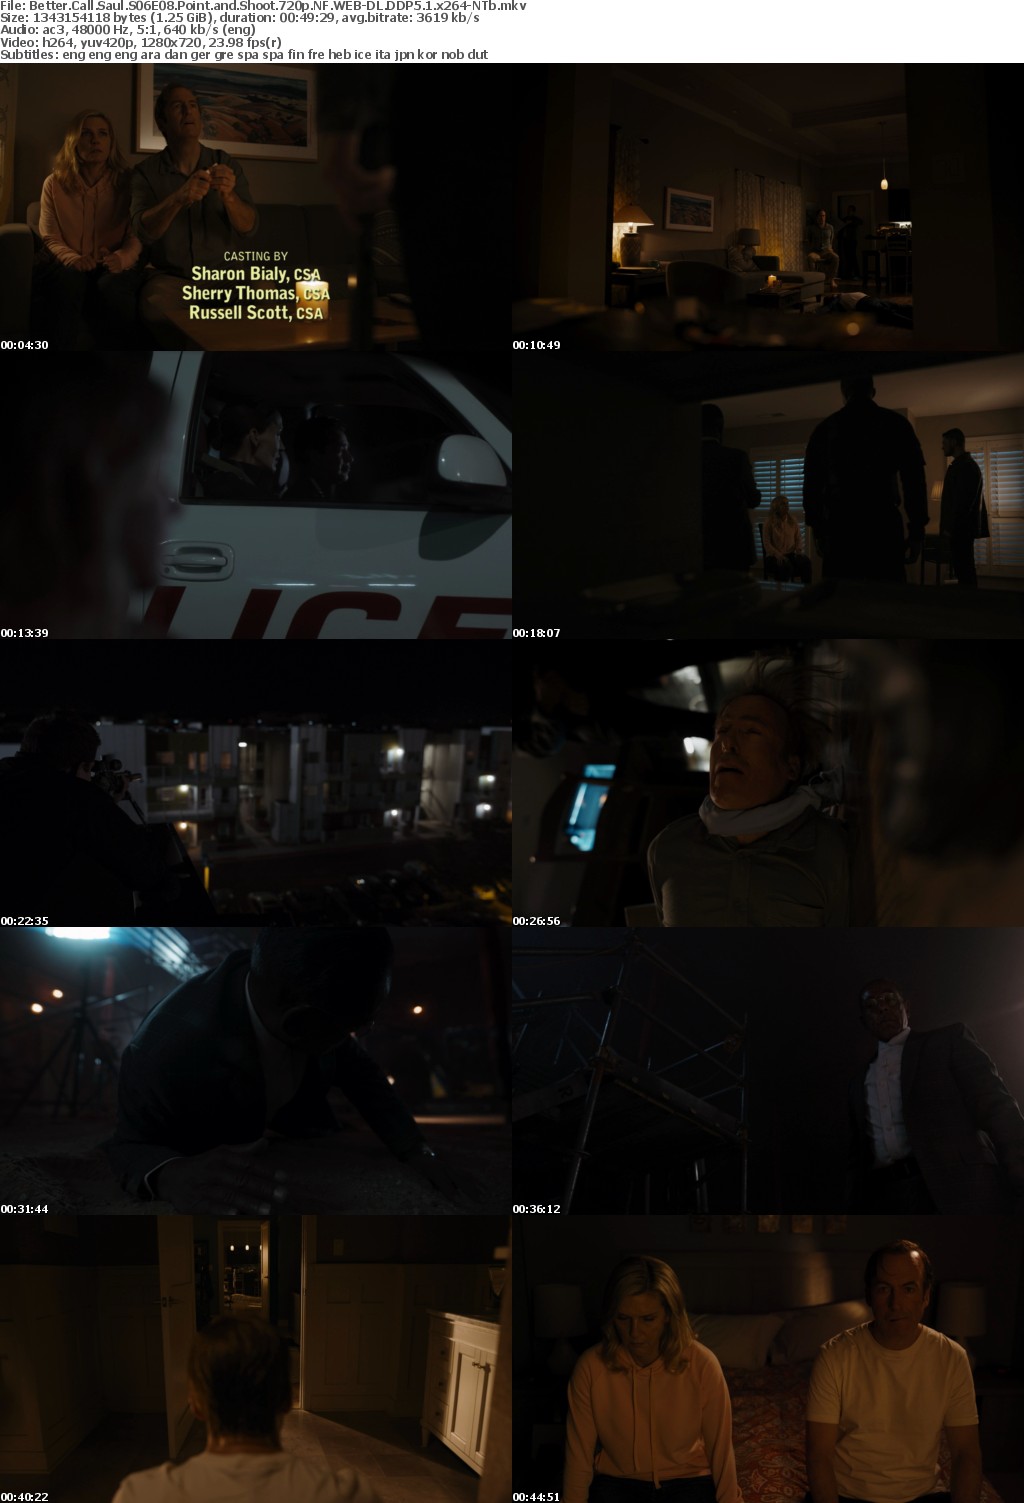 Better Call Saul S06E08 Point and Shoot 720p NF WEBRip DDP5 1 x264-NTb